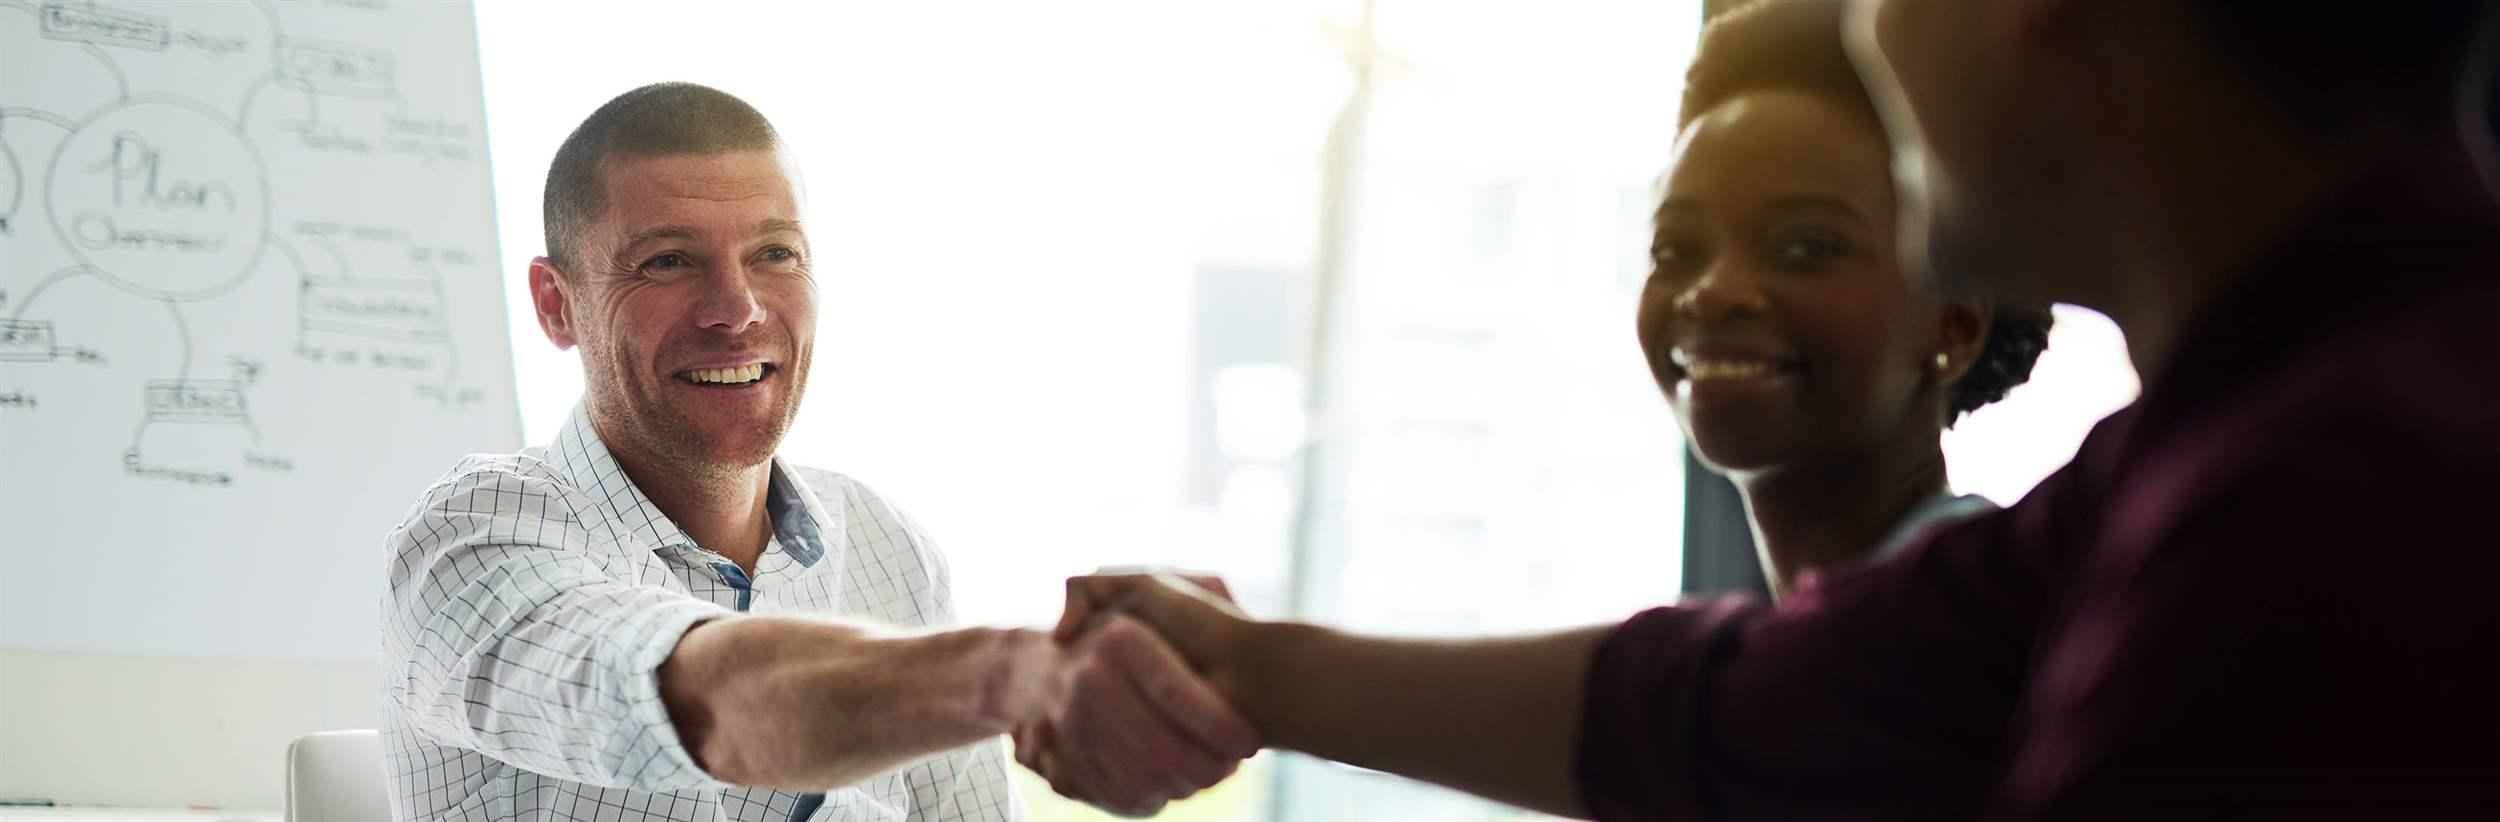 Cropped shot of businesspeople shaking hands during a meeting in an office